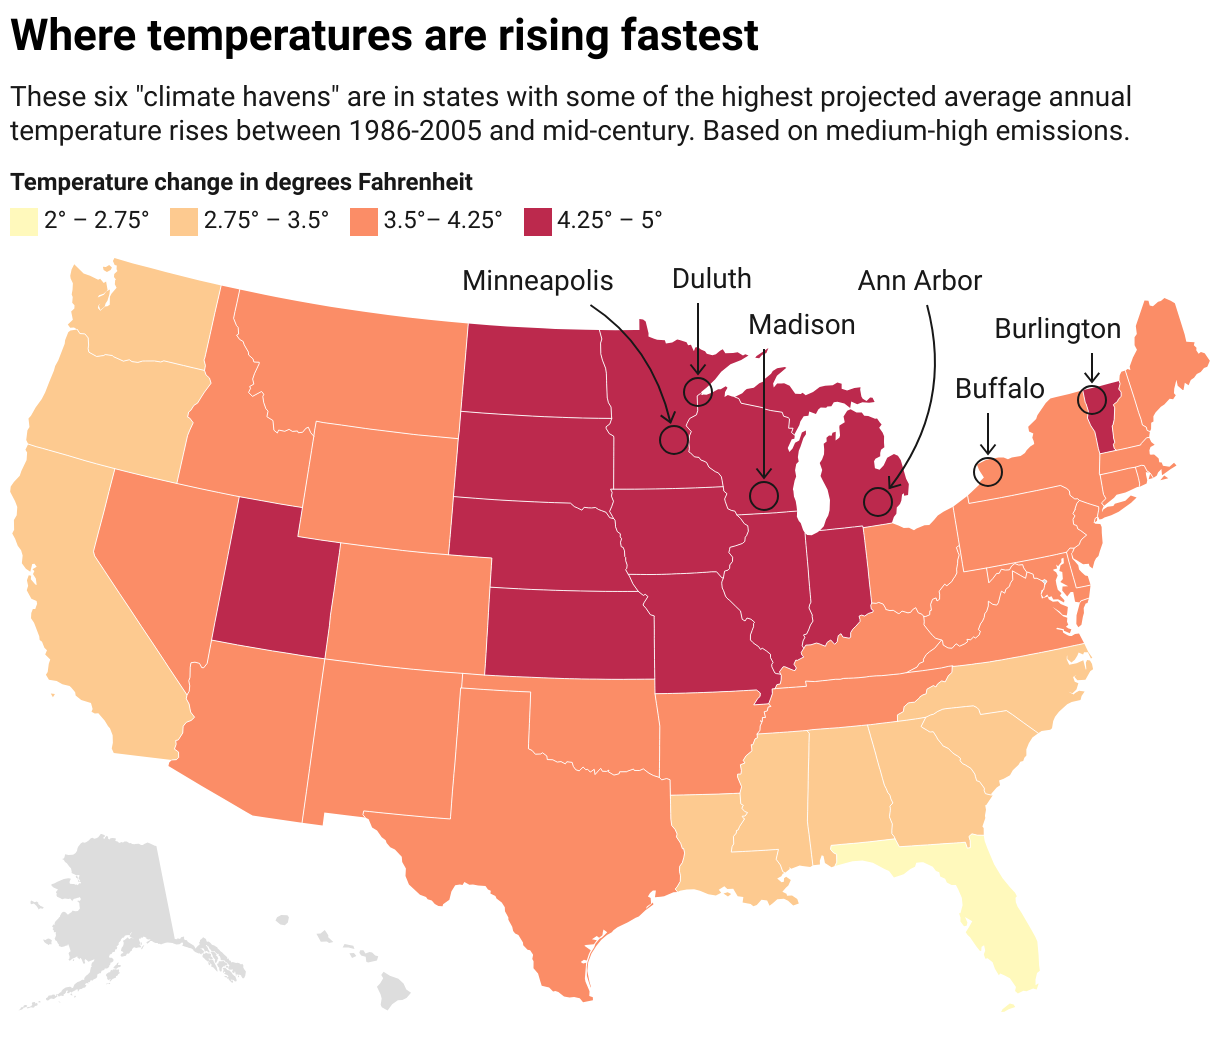 Color-coded U.S. map shows projected average annual temperature change in each state between 1986–2005 and mid-century and highlights six “climate haven” cities, where projected temperature rises are in the upper range.